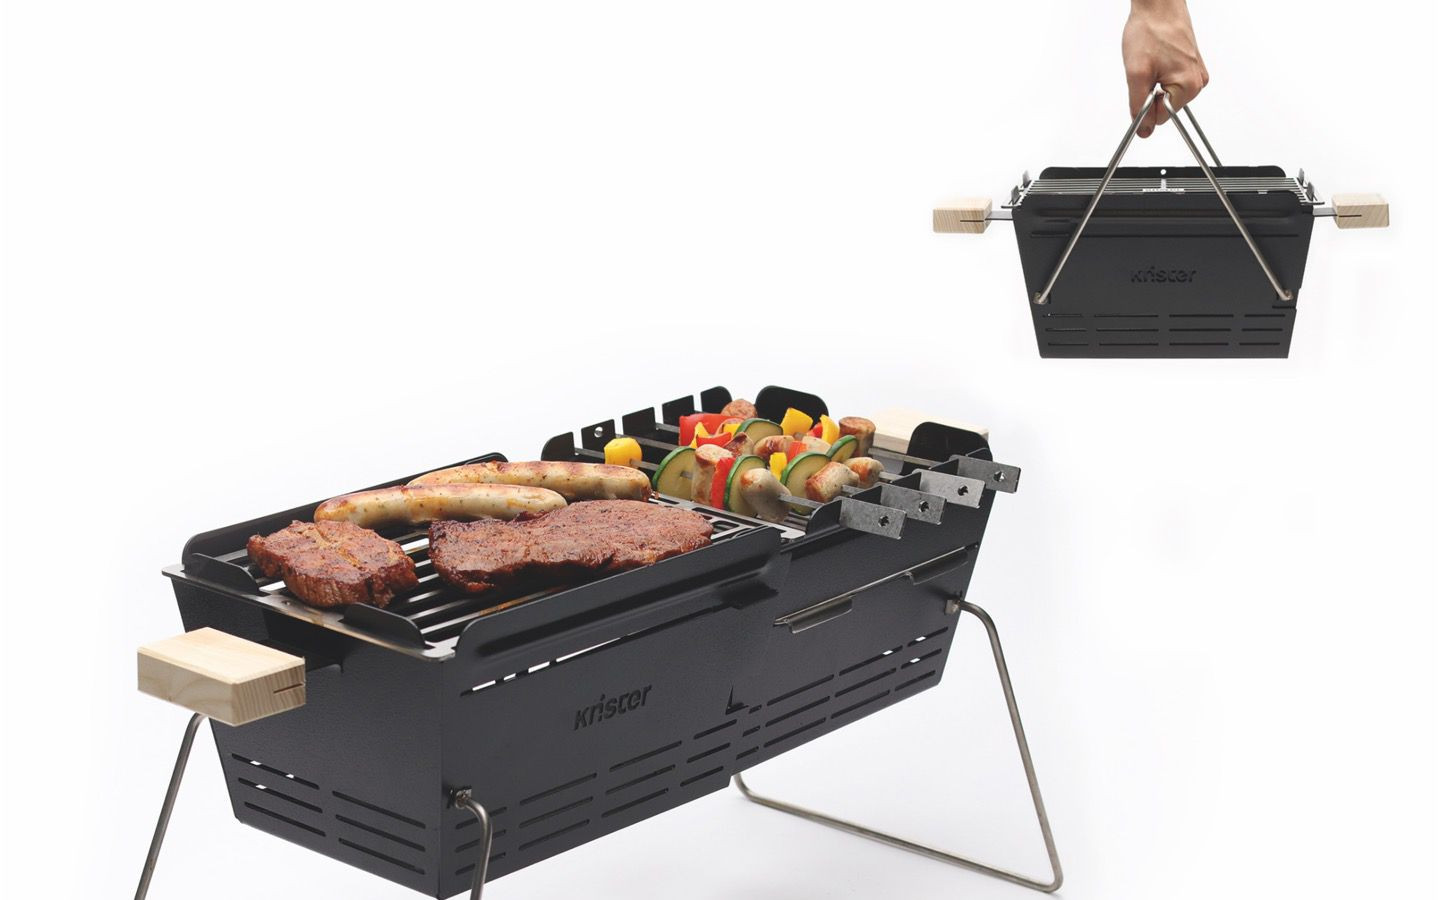 Knister-Grill